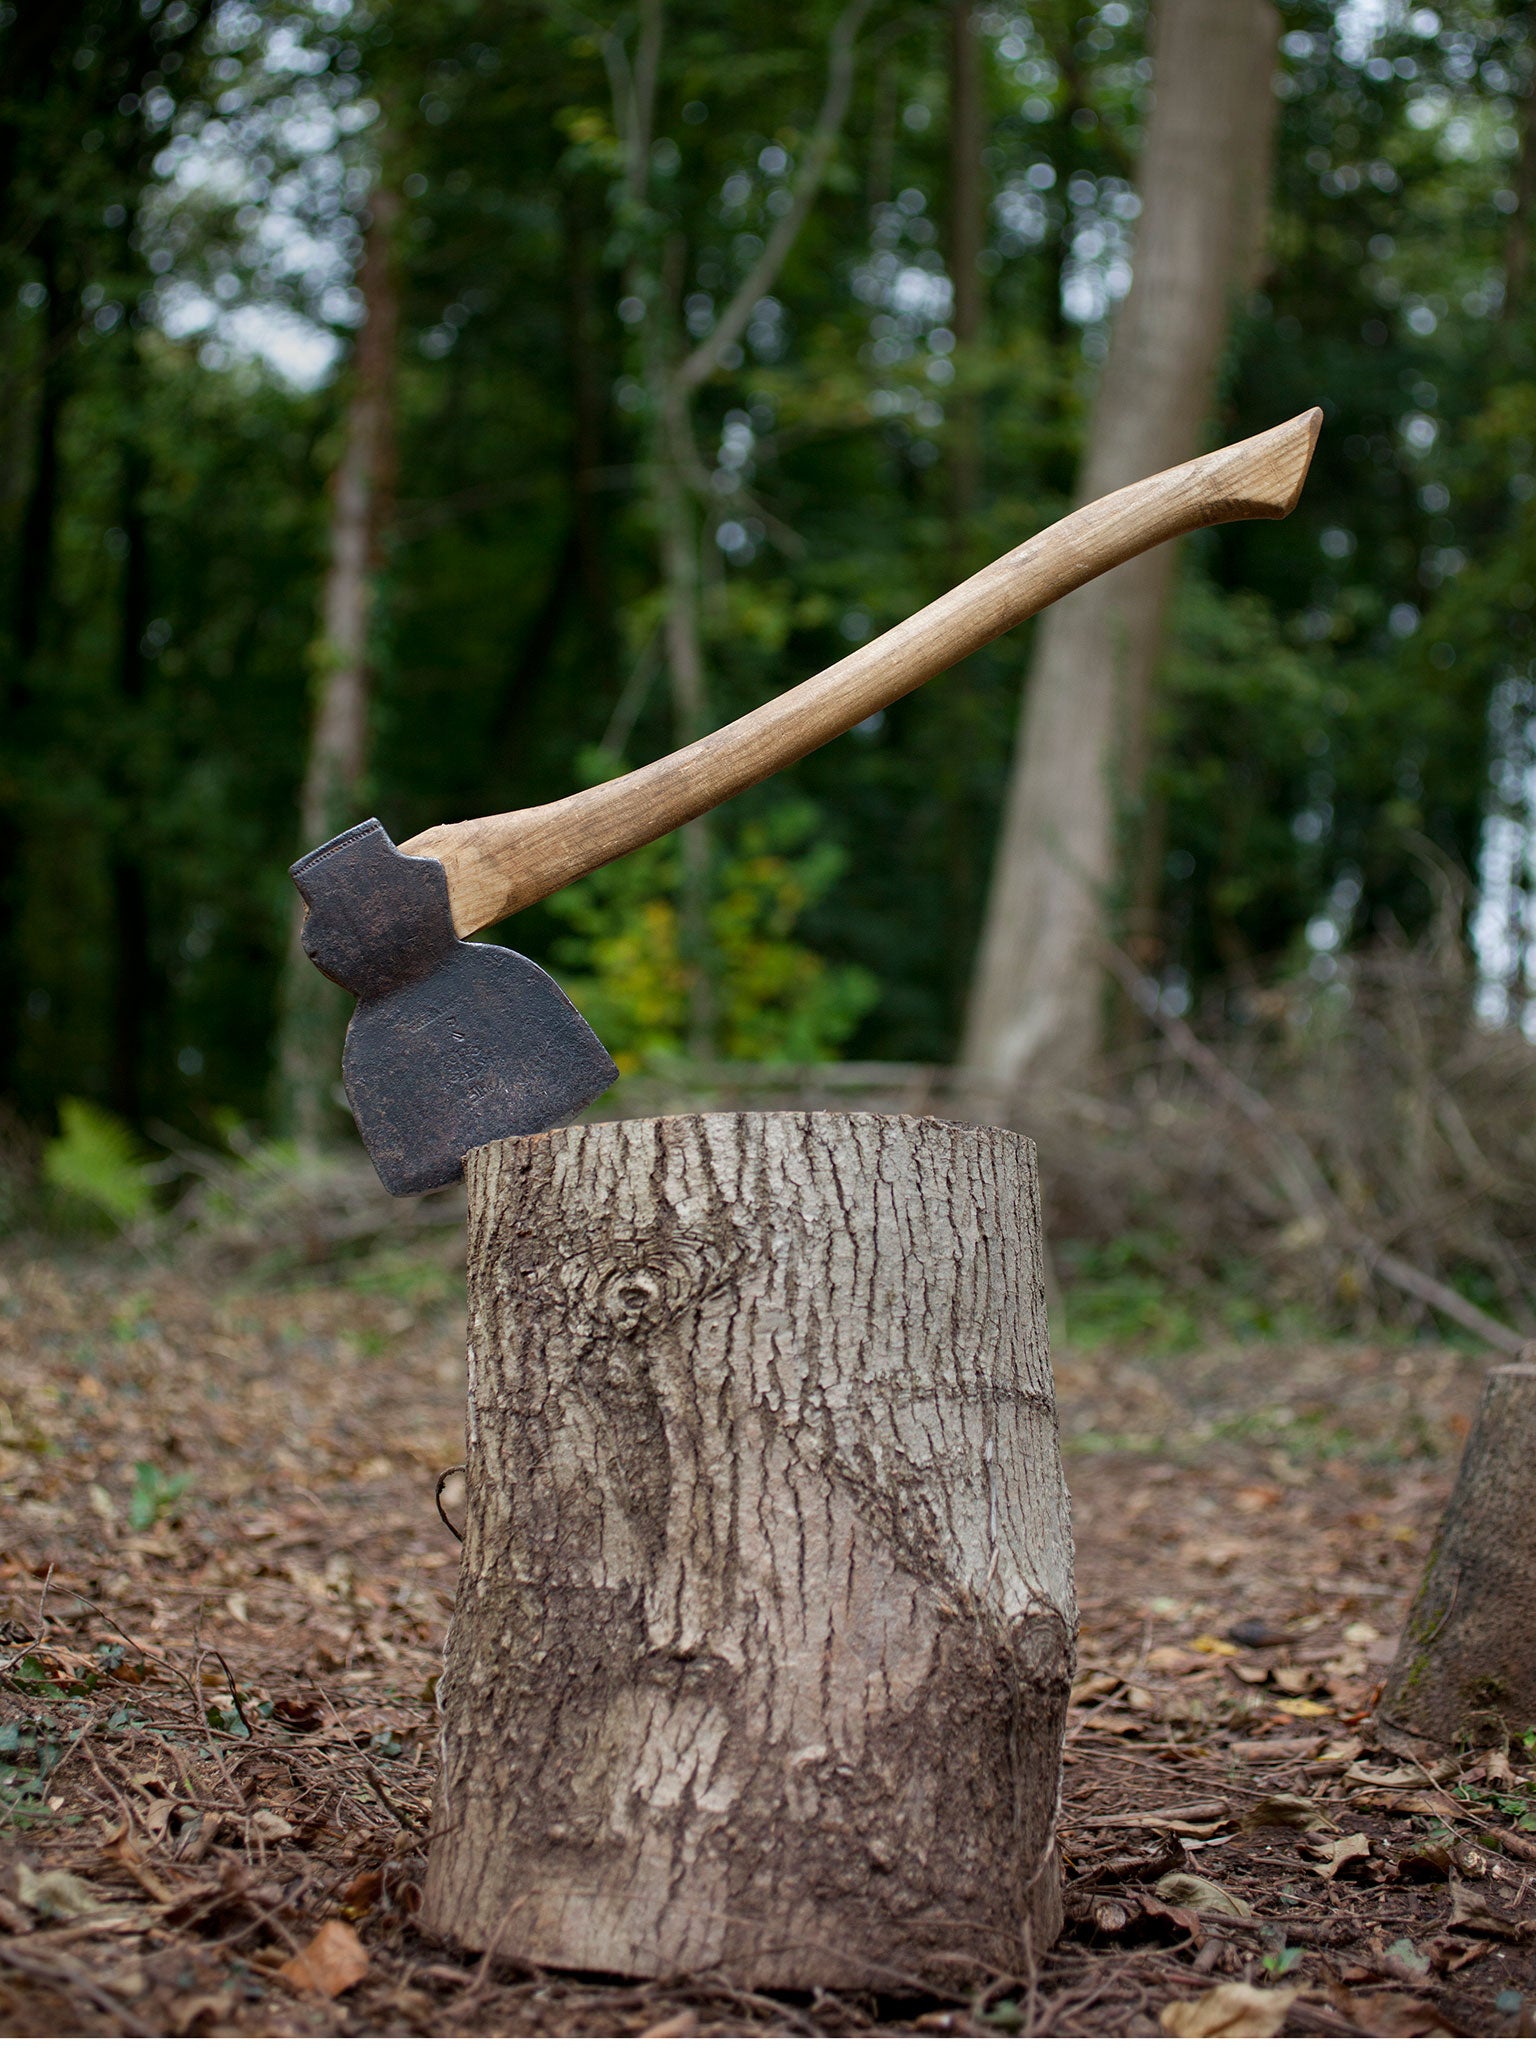 ‘I can fall into a trance chopping wood: it is a form of meditation, albeit with a lethal weapon’